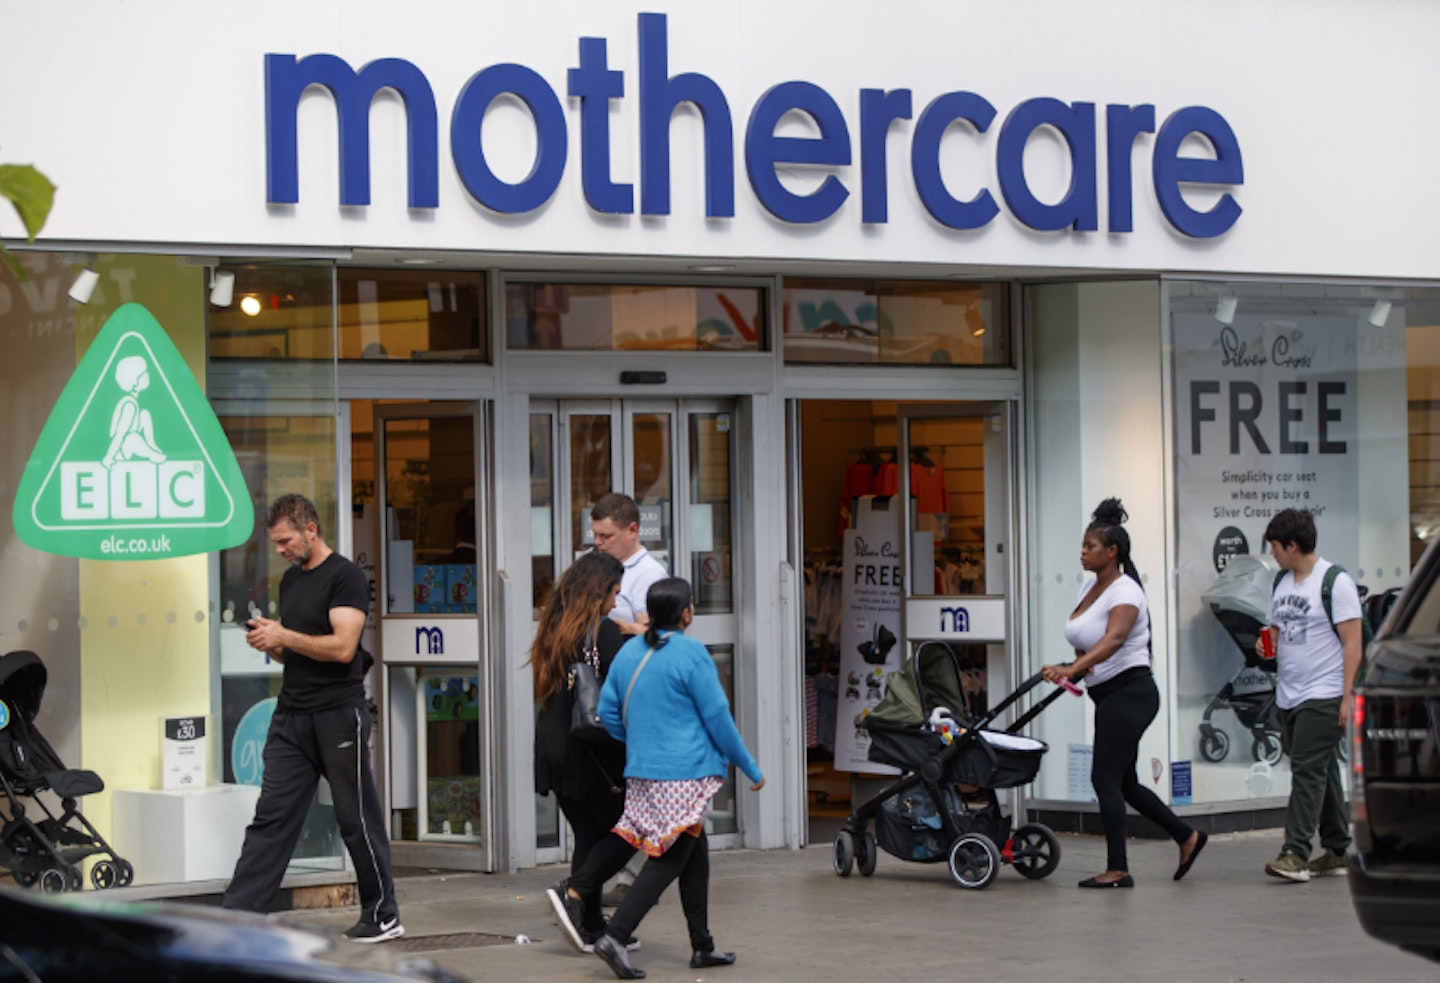 Sad news as Mothercare plans to go into administration